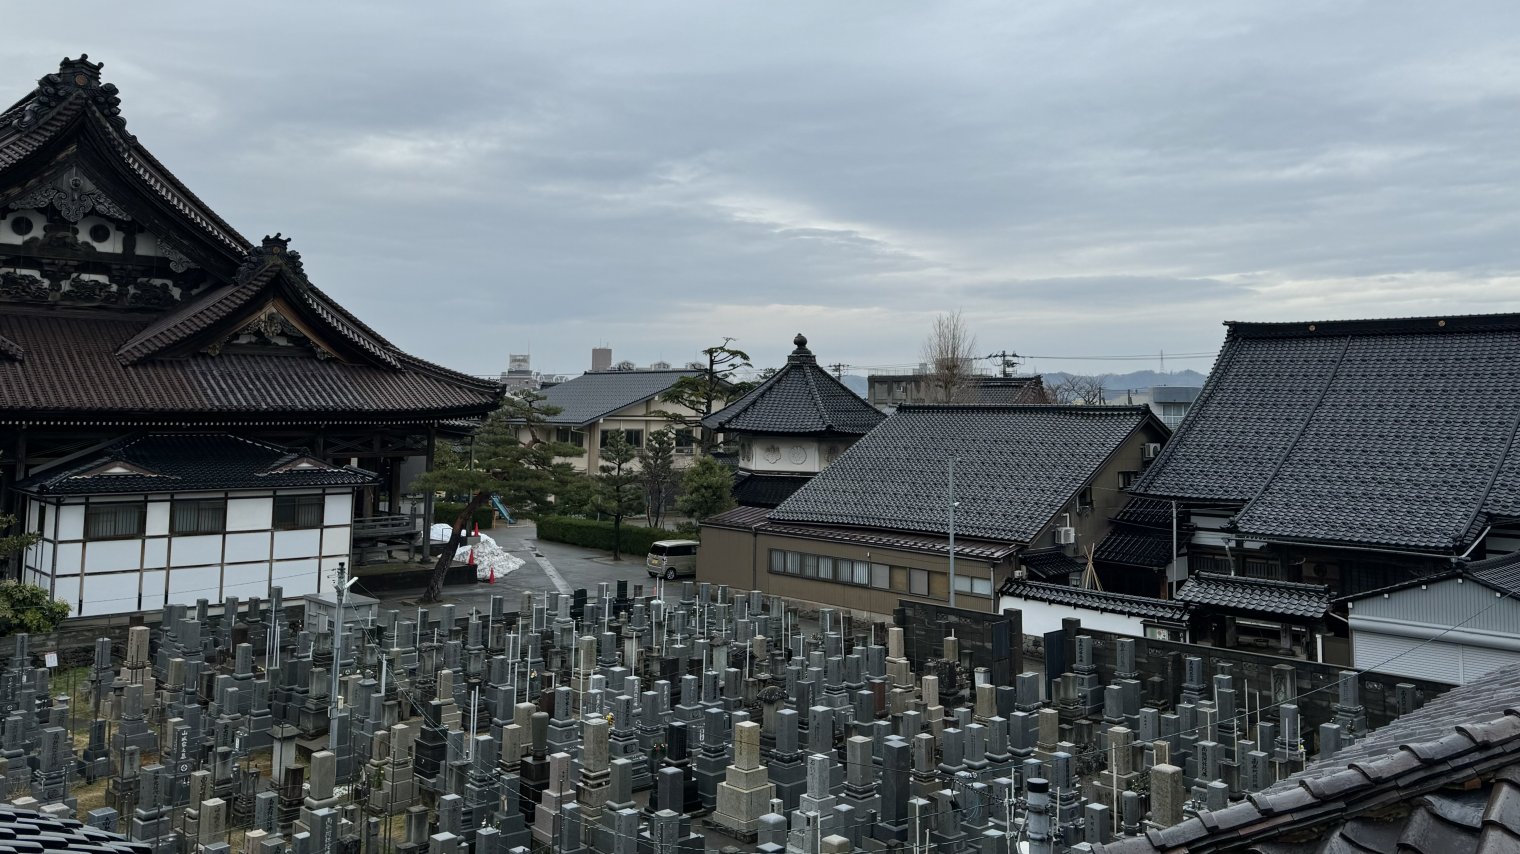 View of graveyard in Kanazawa from the third floor of our accommodation